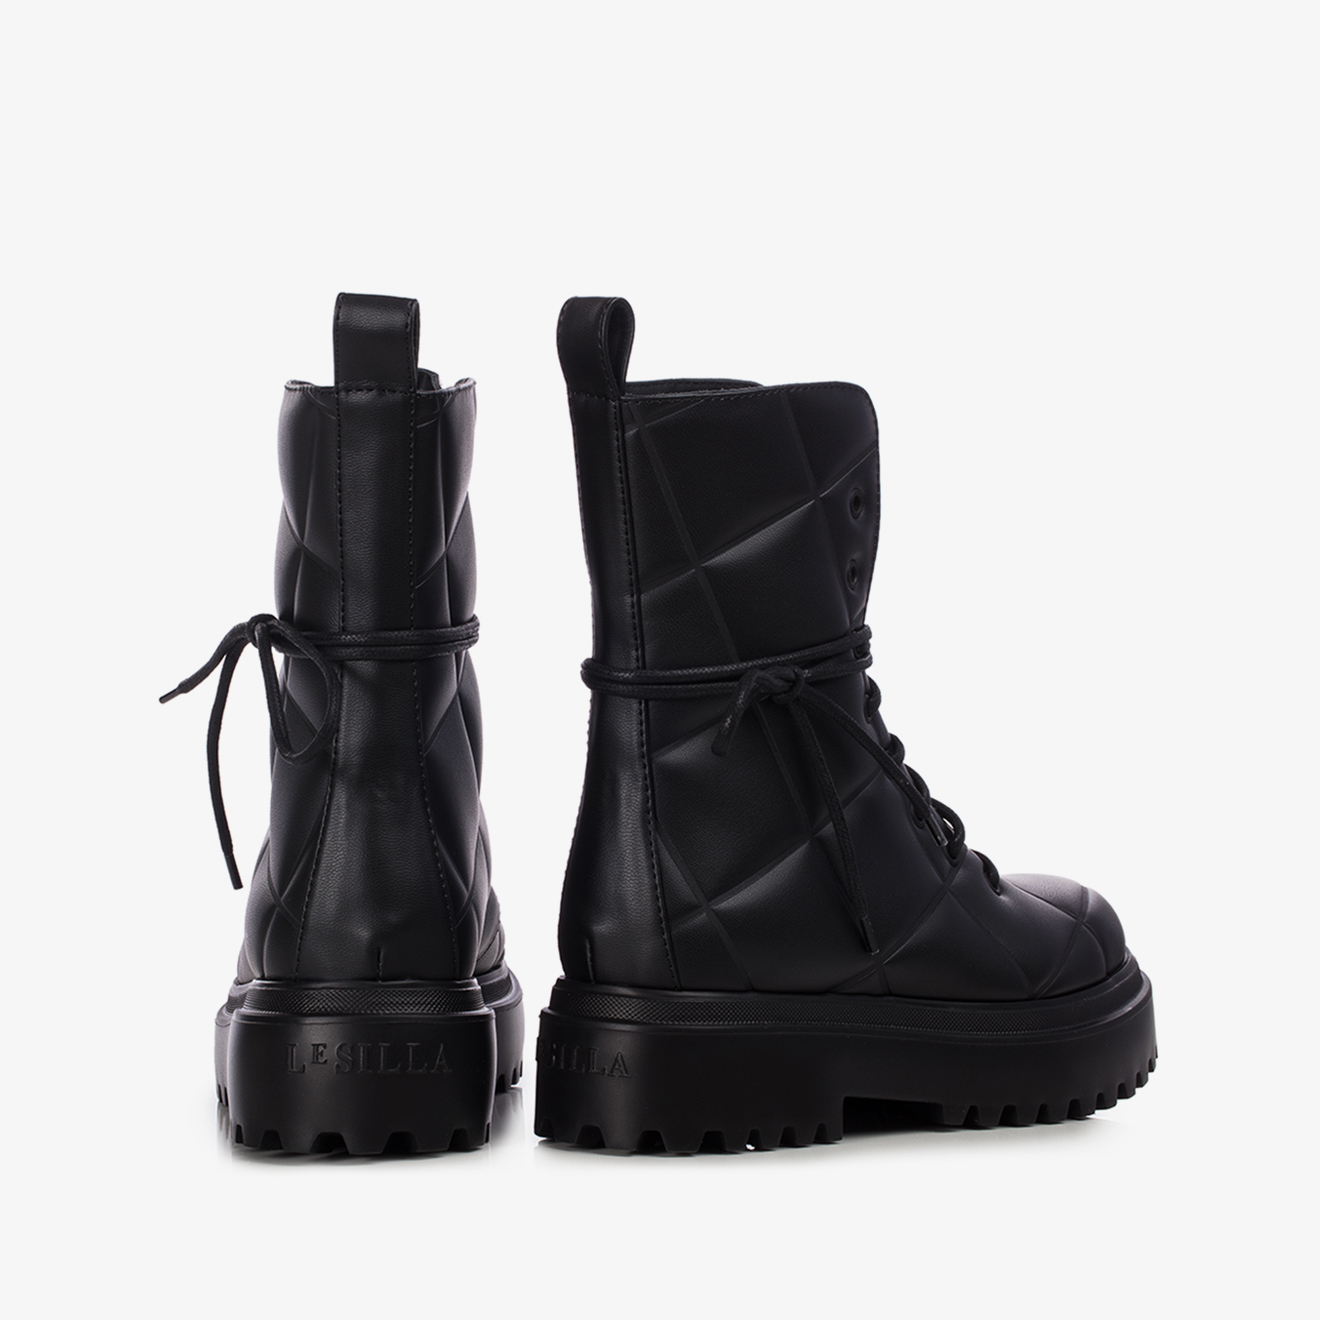 RANGER ANKLE BOOT 50 mm - Le Silla official outlet